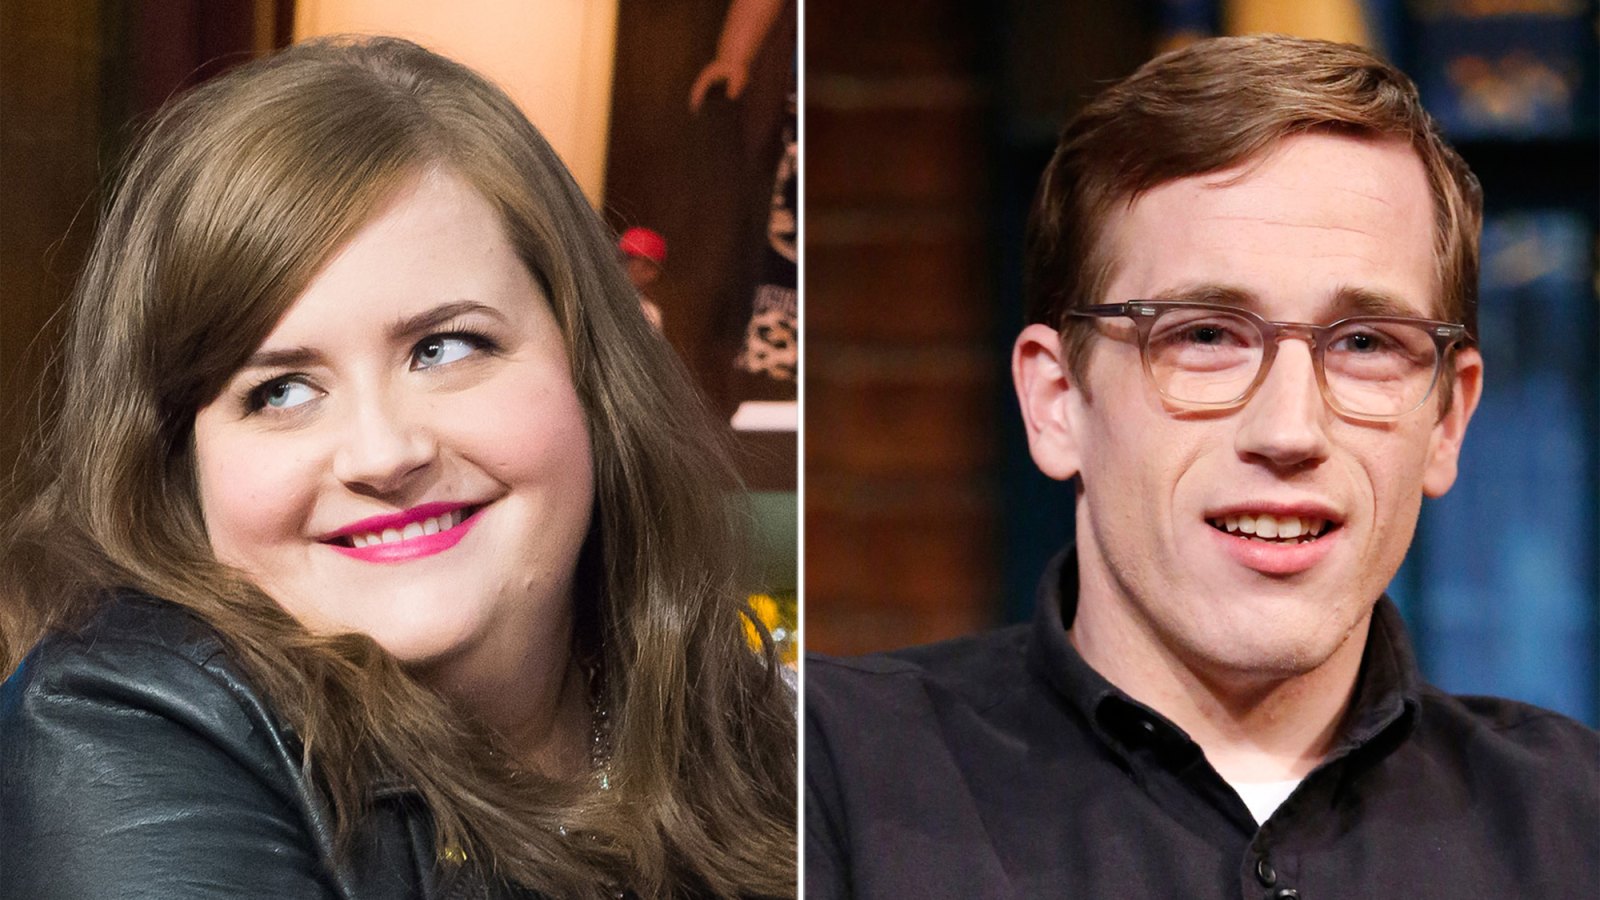 Aidy Bryant and Conner O'Malley marry